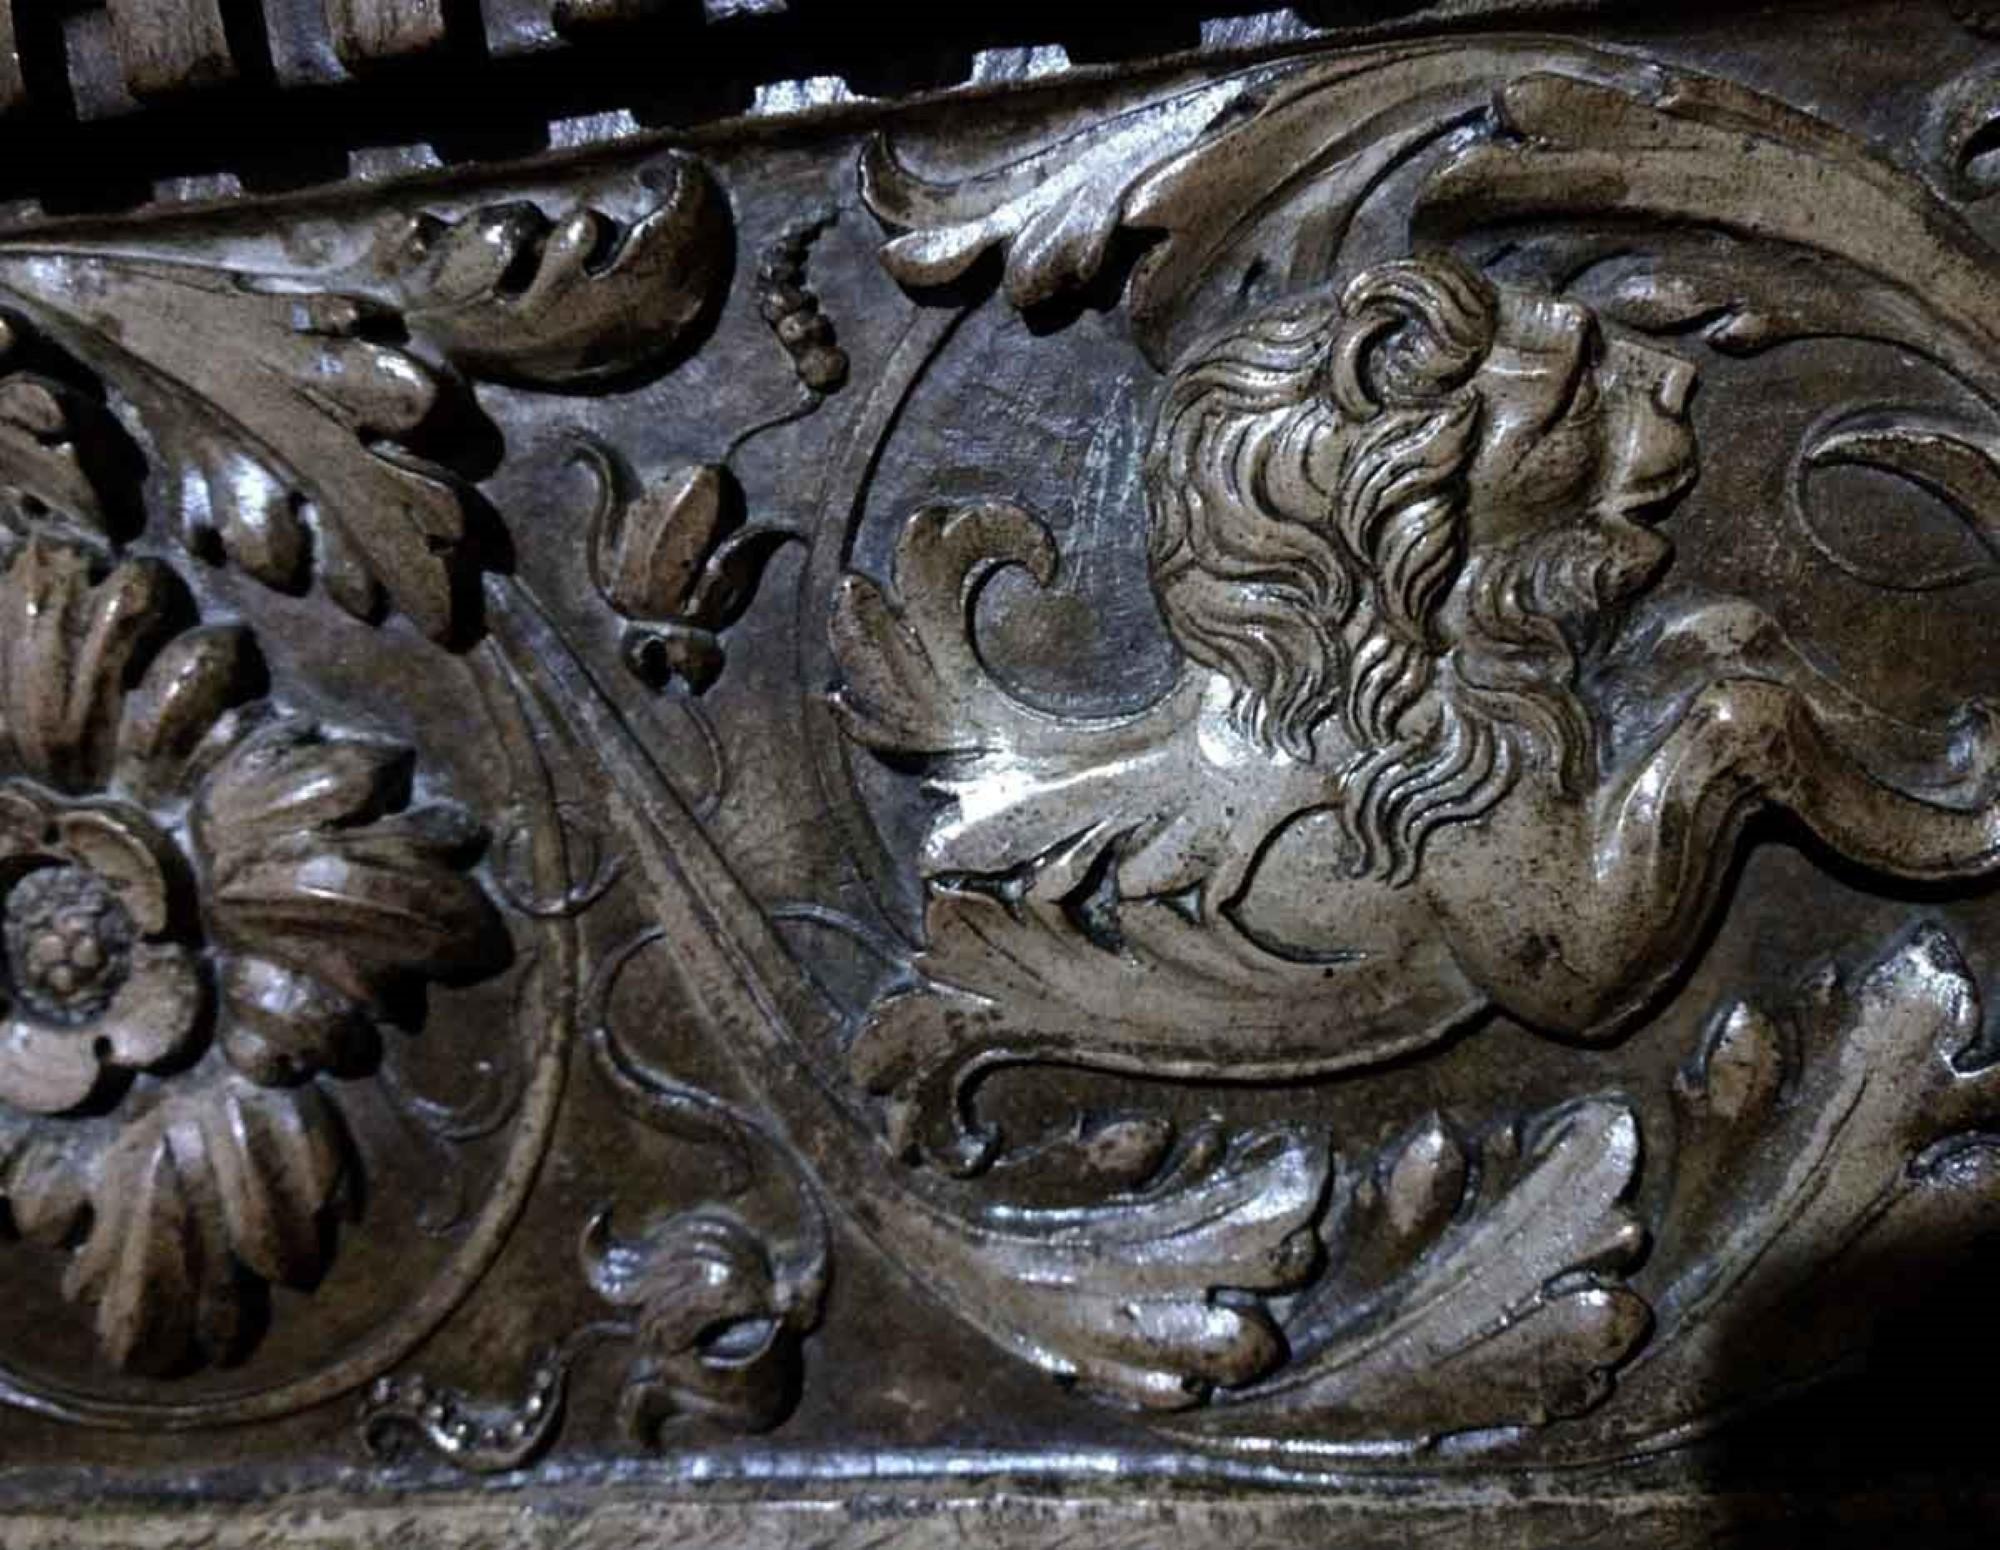 This is a late 1800s large scale carved, stained, and lacquered French limestone mantel. It was reclaimed from a prominent private residence on the upper West side of Manhattan. Floral patterns, lions, centaur type figures, and a unique helmeted